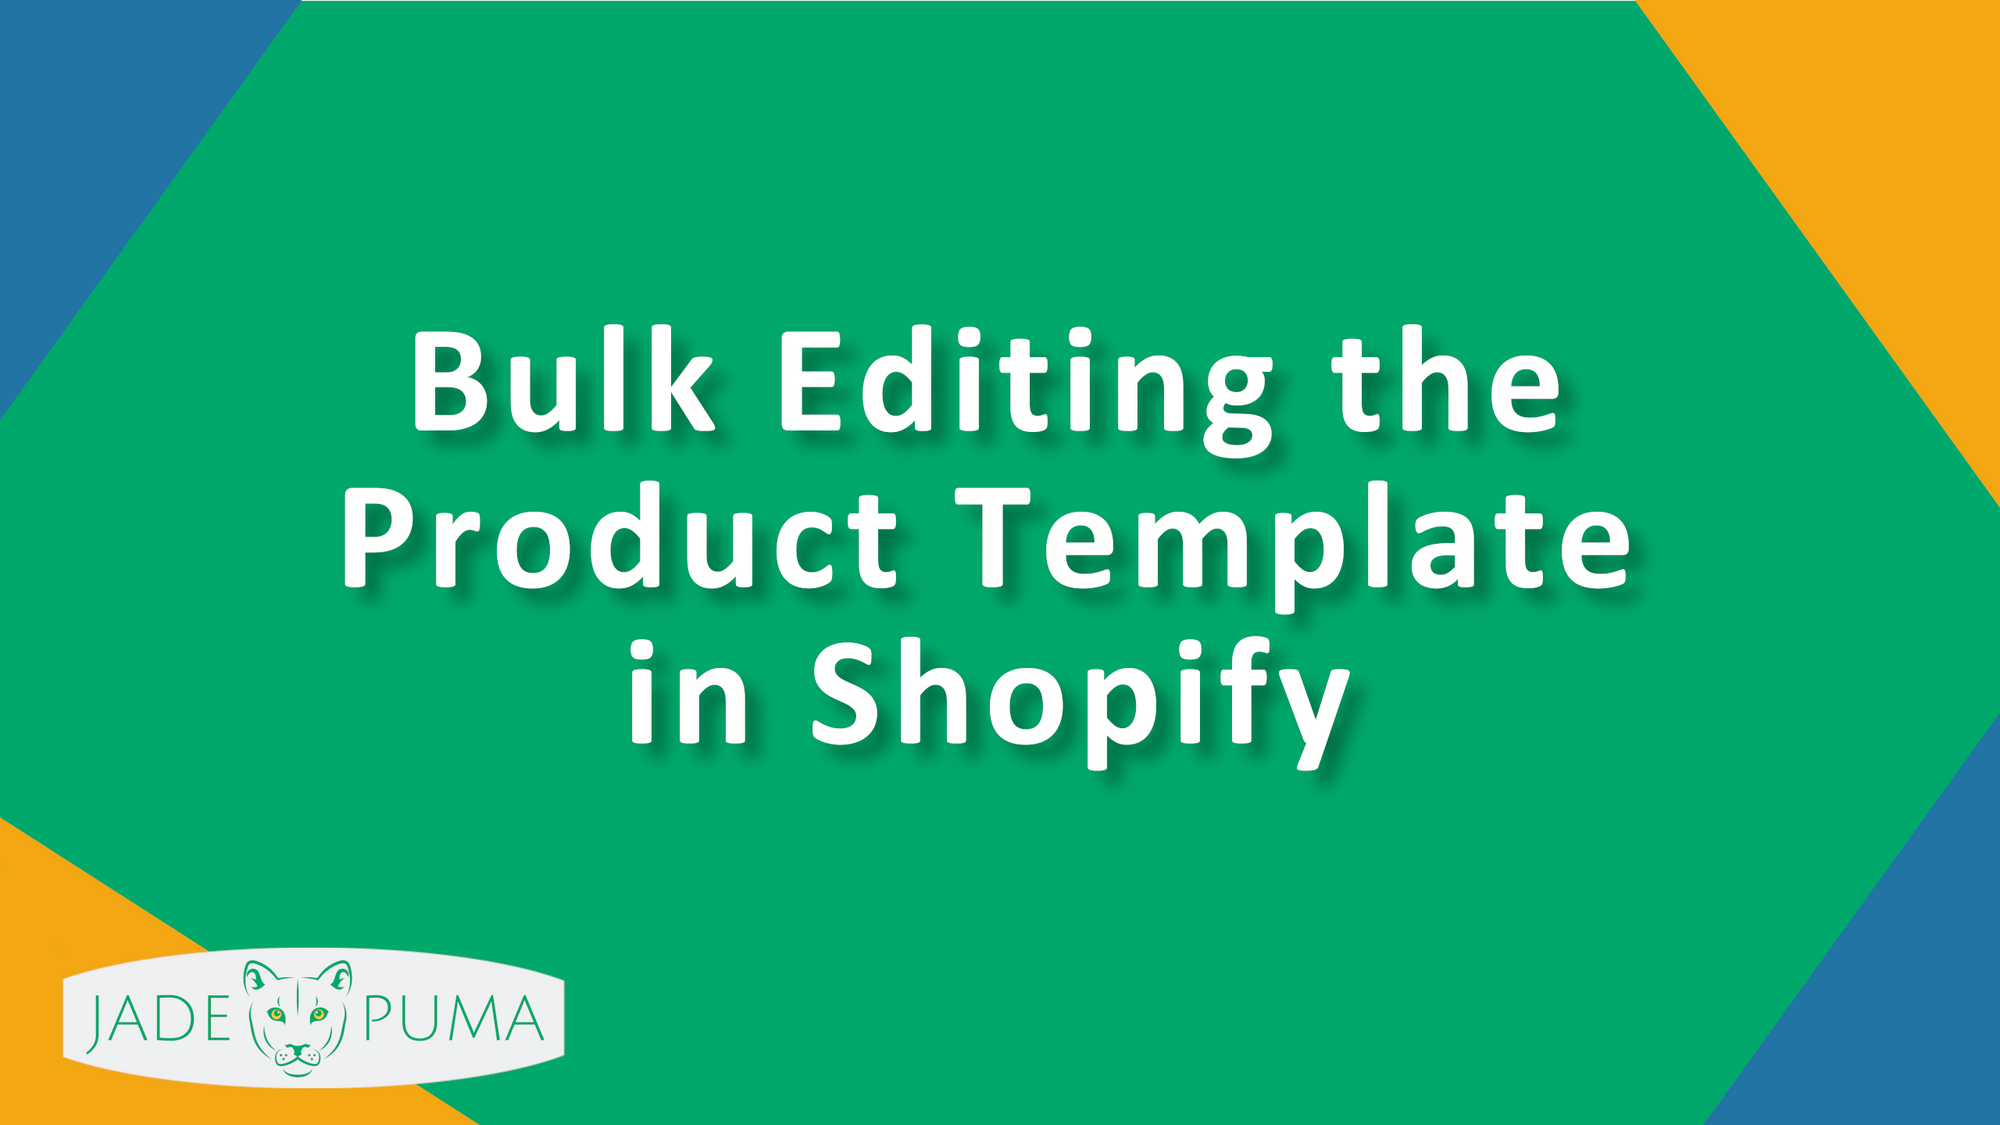 Bulk Editing Product Templates in Shopify